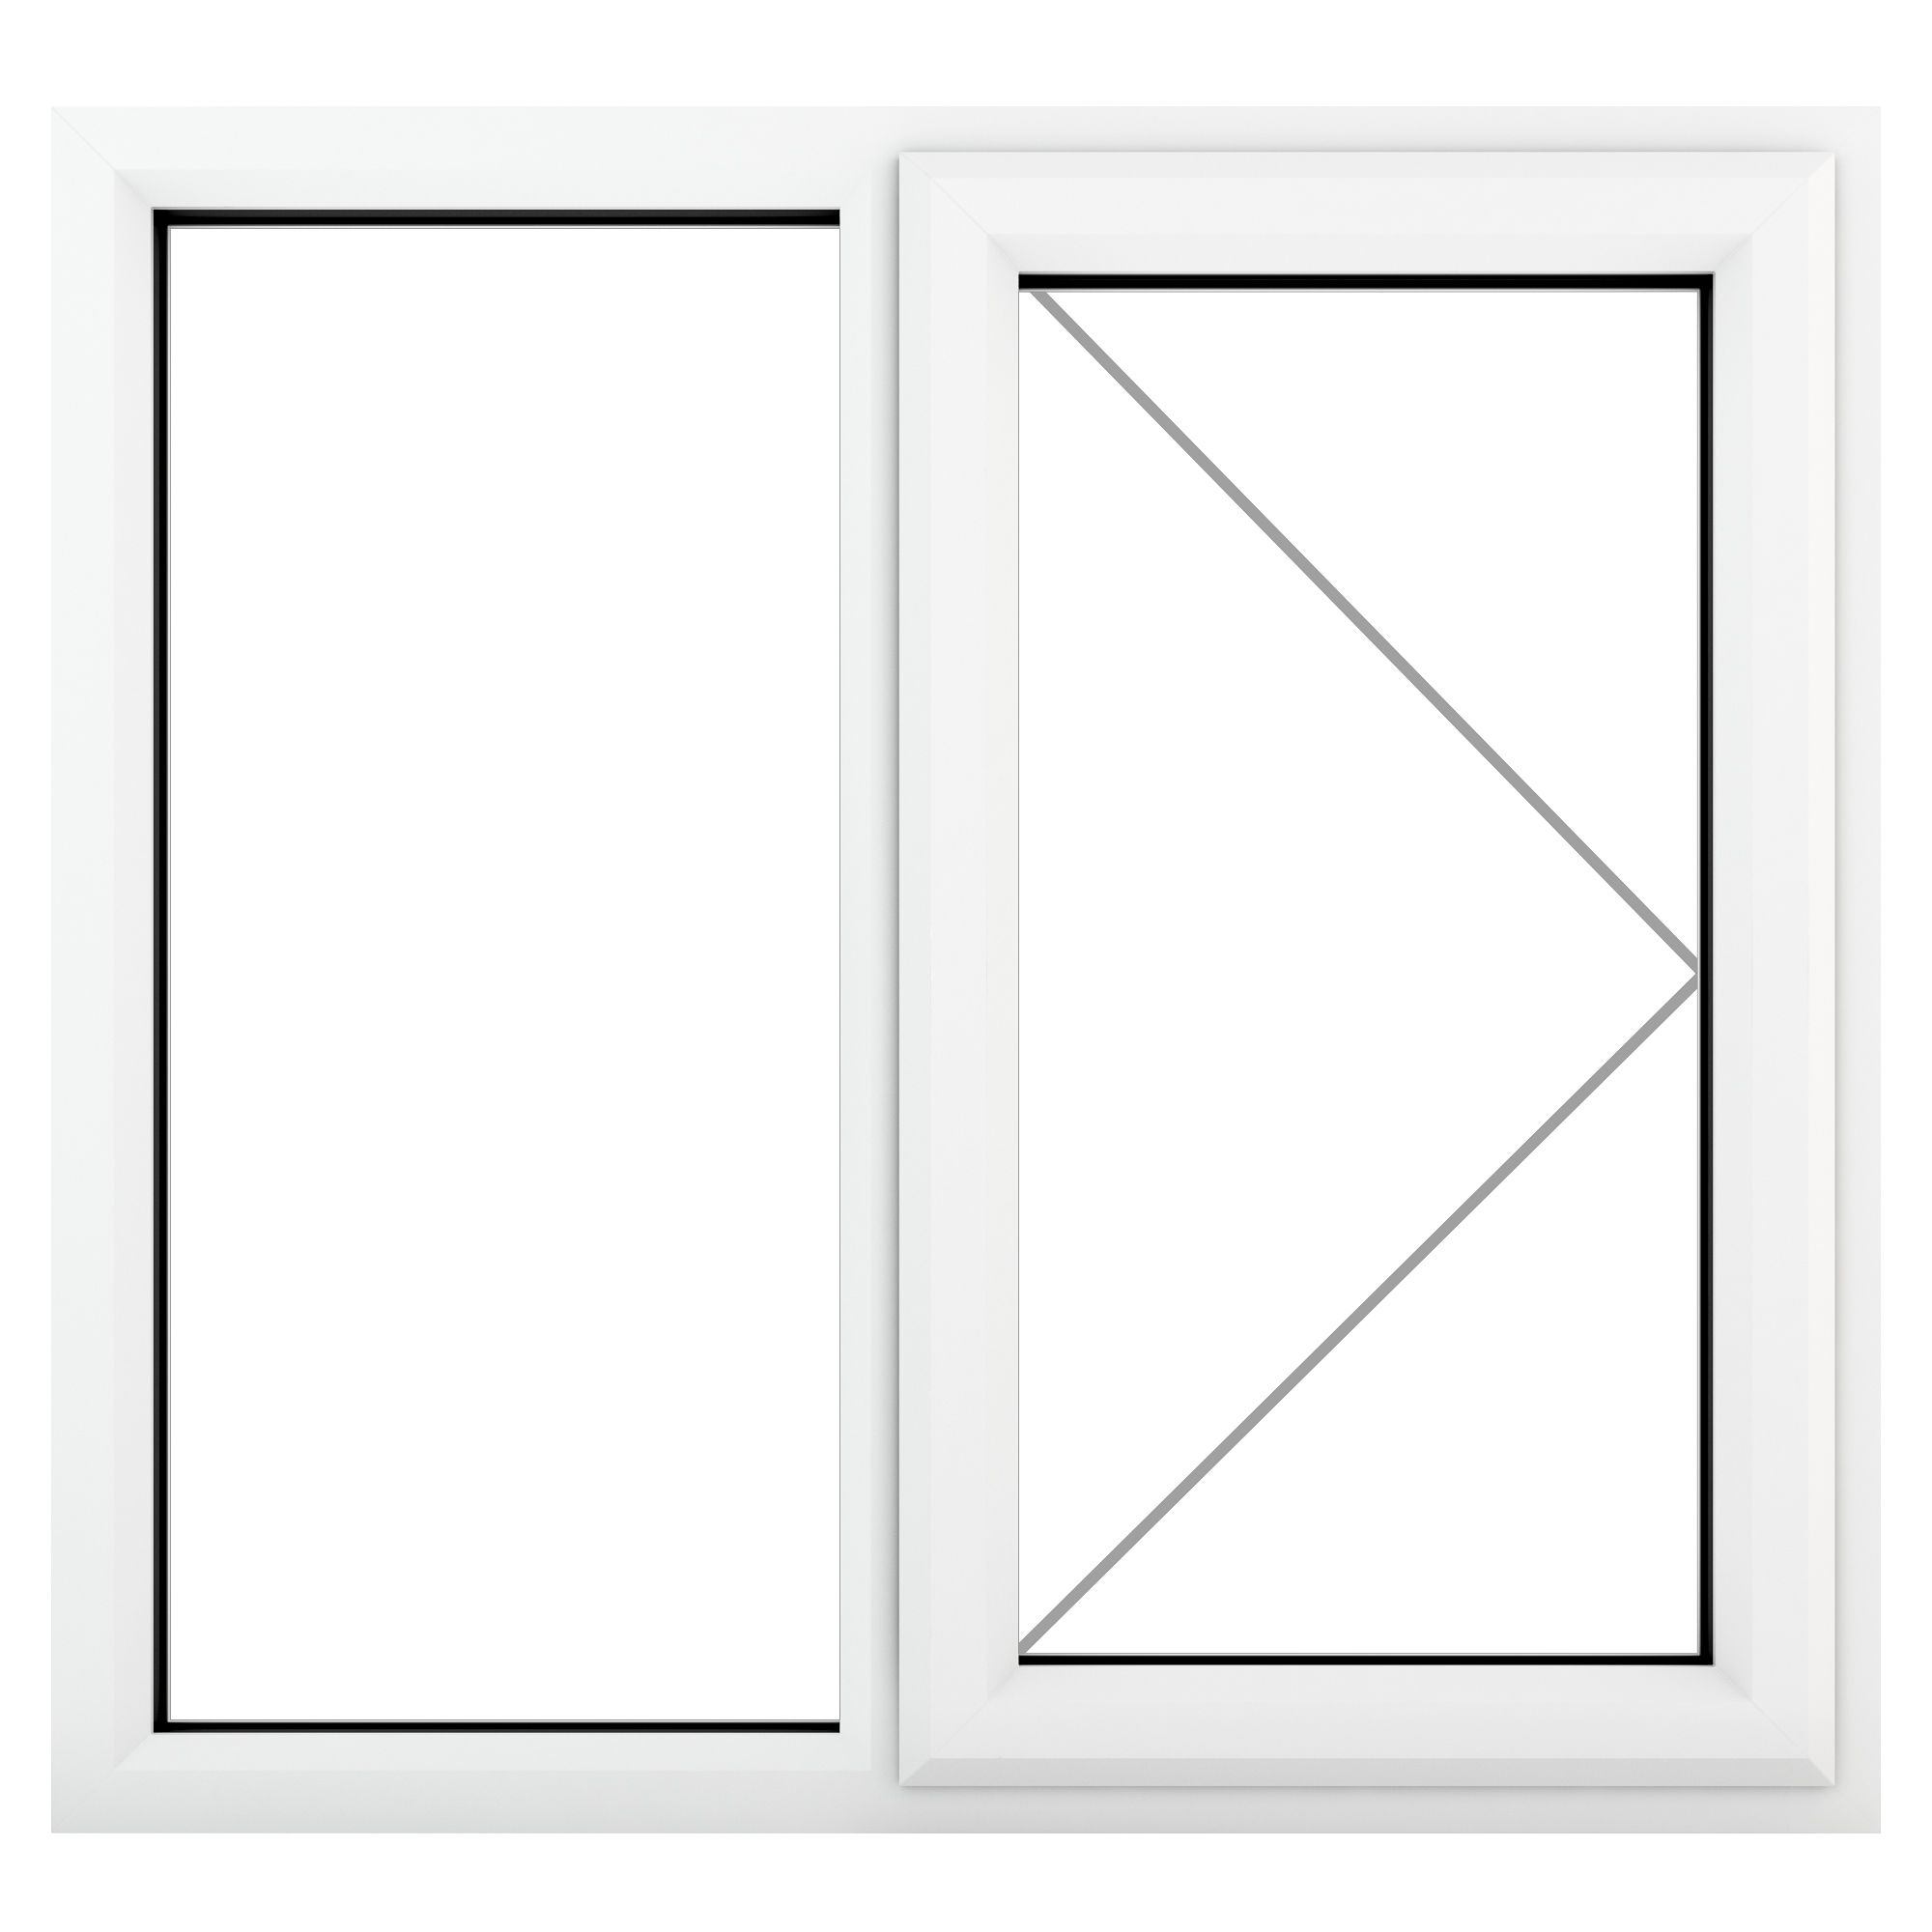 Fortia 2P Clear Glazed White uPVC Right-handed Swinging Window, (H)1040mm (W)1190mm